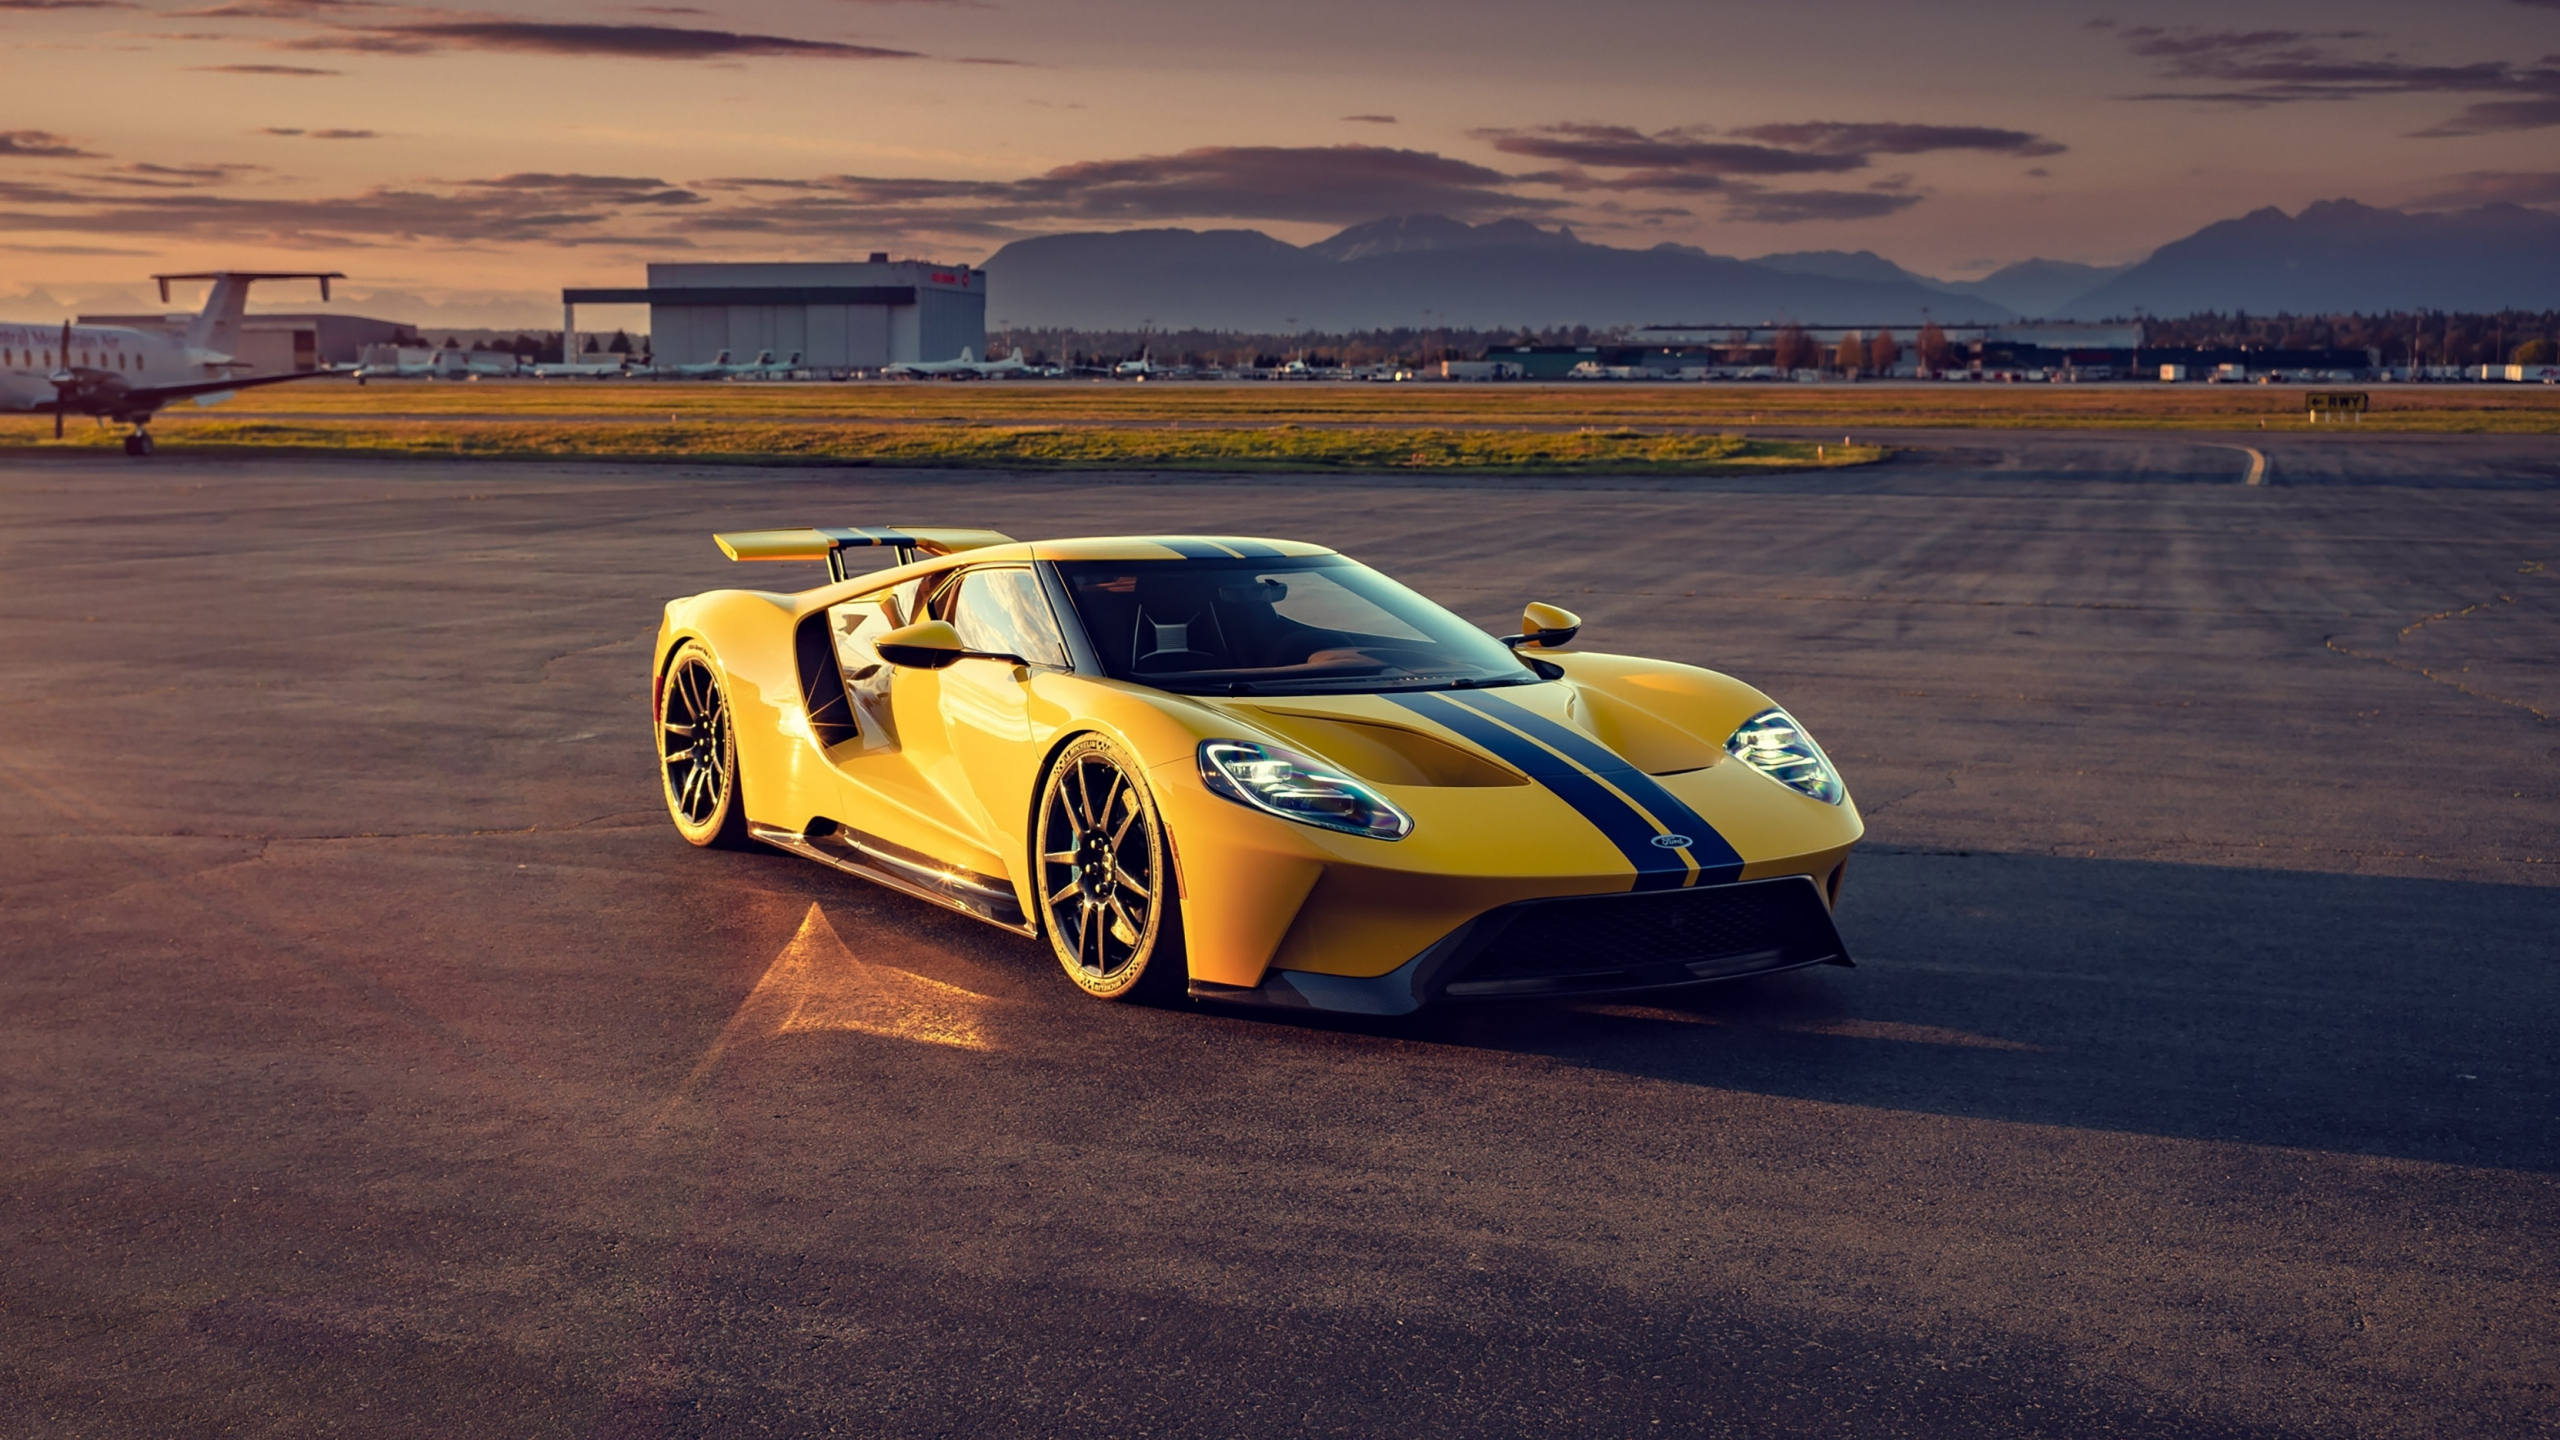 Download 2560x1440 Wallpaper Yellow Ford Gt 2020 Dual Wide Widescreen 16 9 Widescreen 2560x1440 Hd Image Background 24546